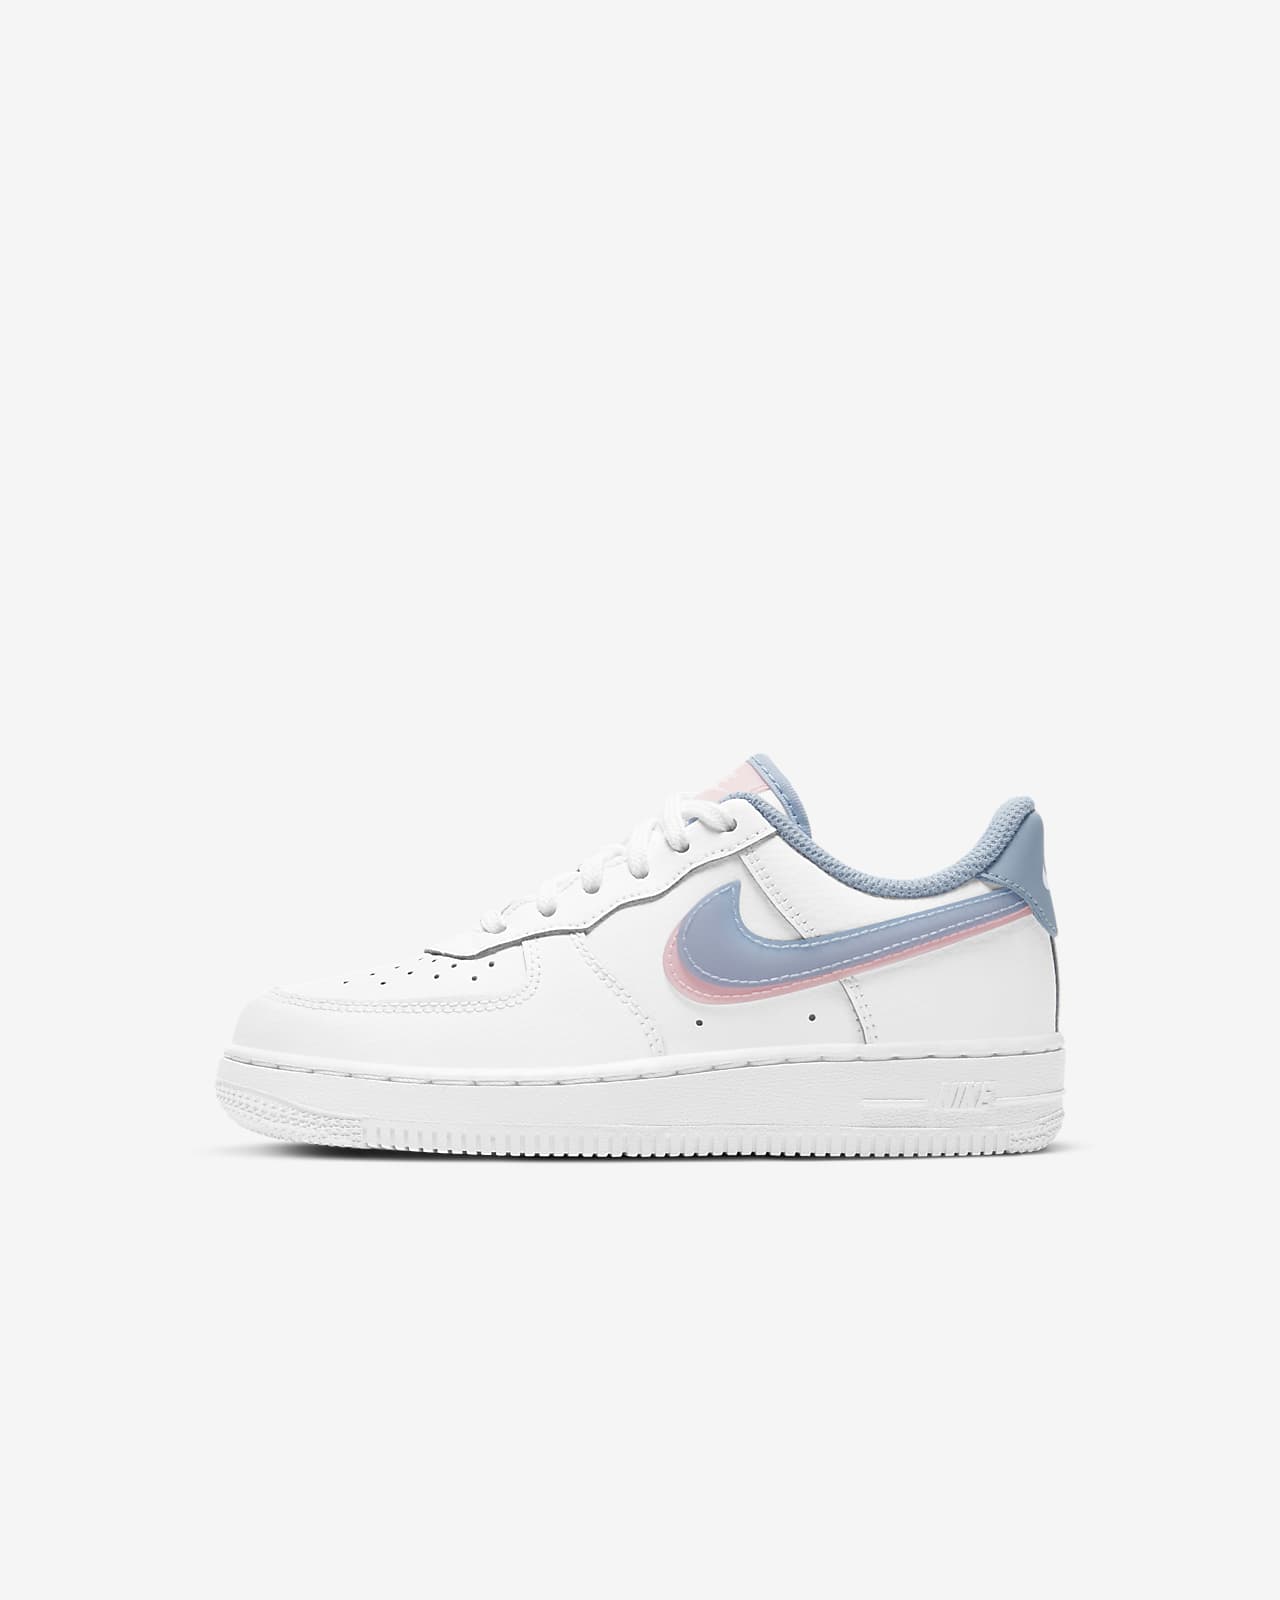 air force one lv8